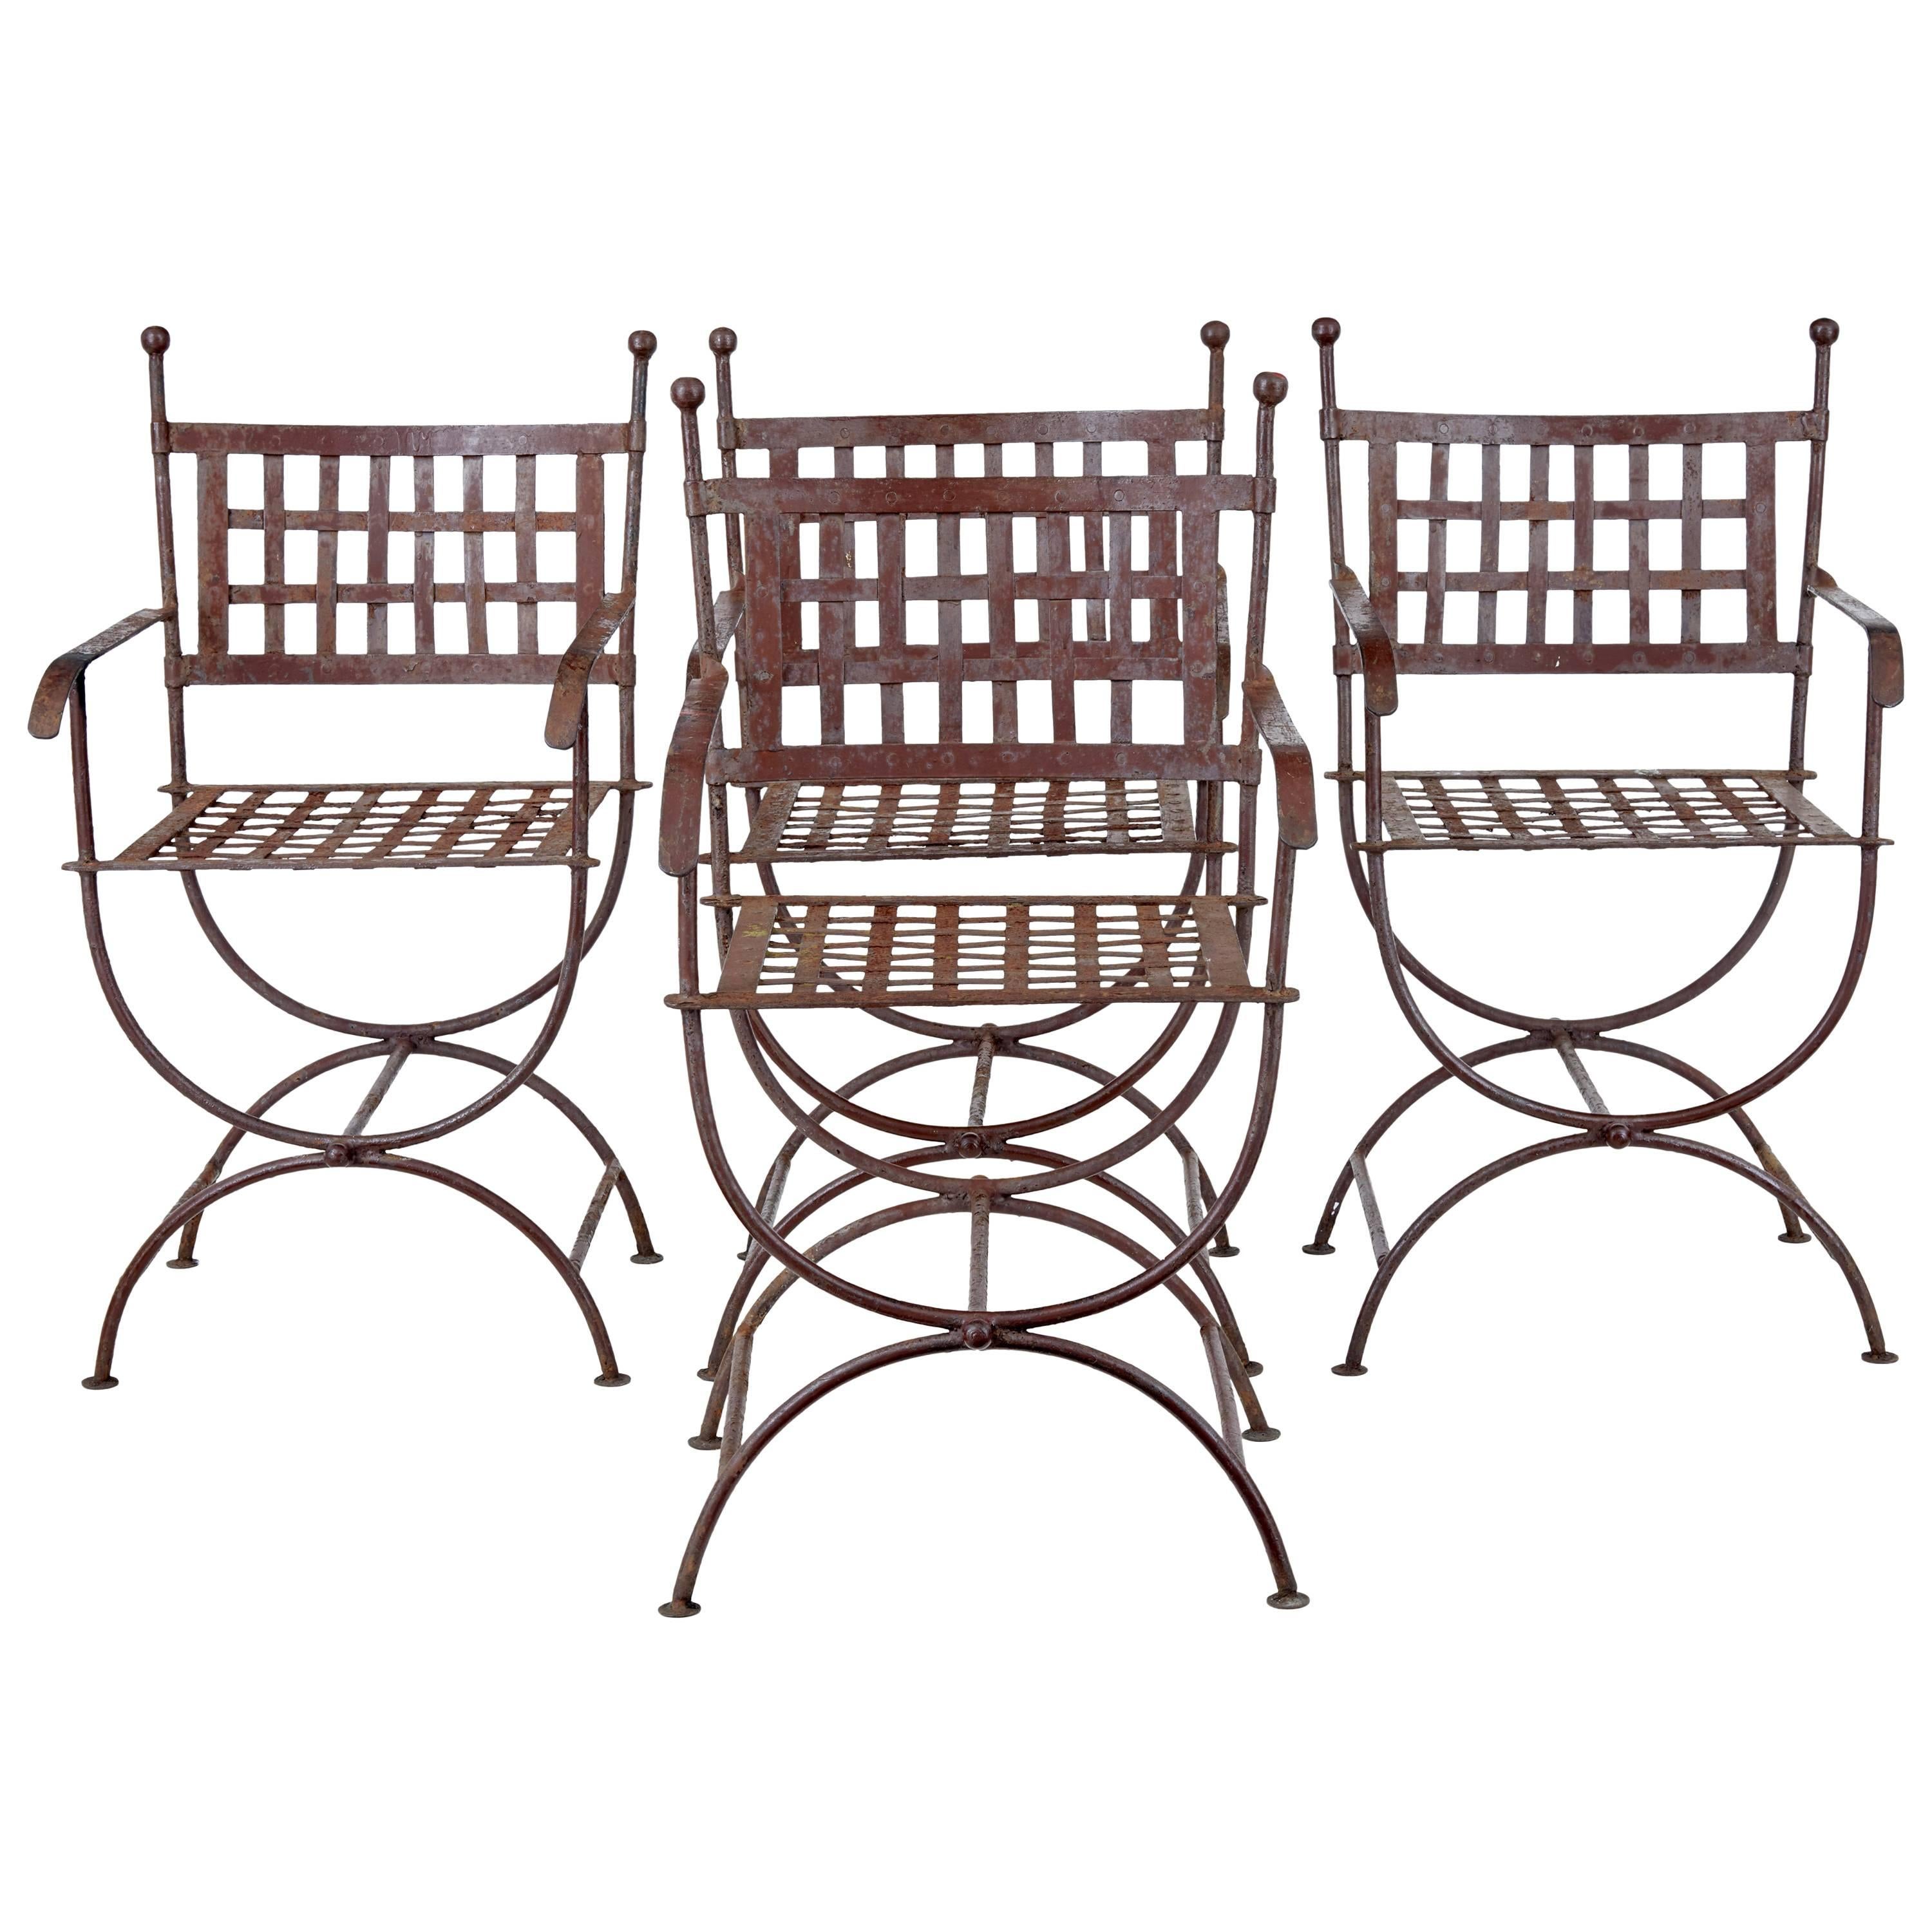 Set of Four Wrought Iron Decorative Garden Chairs